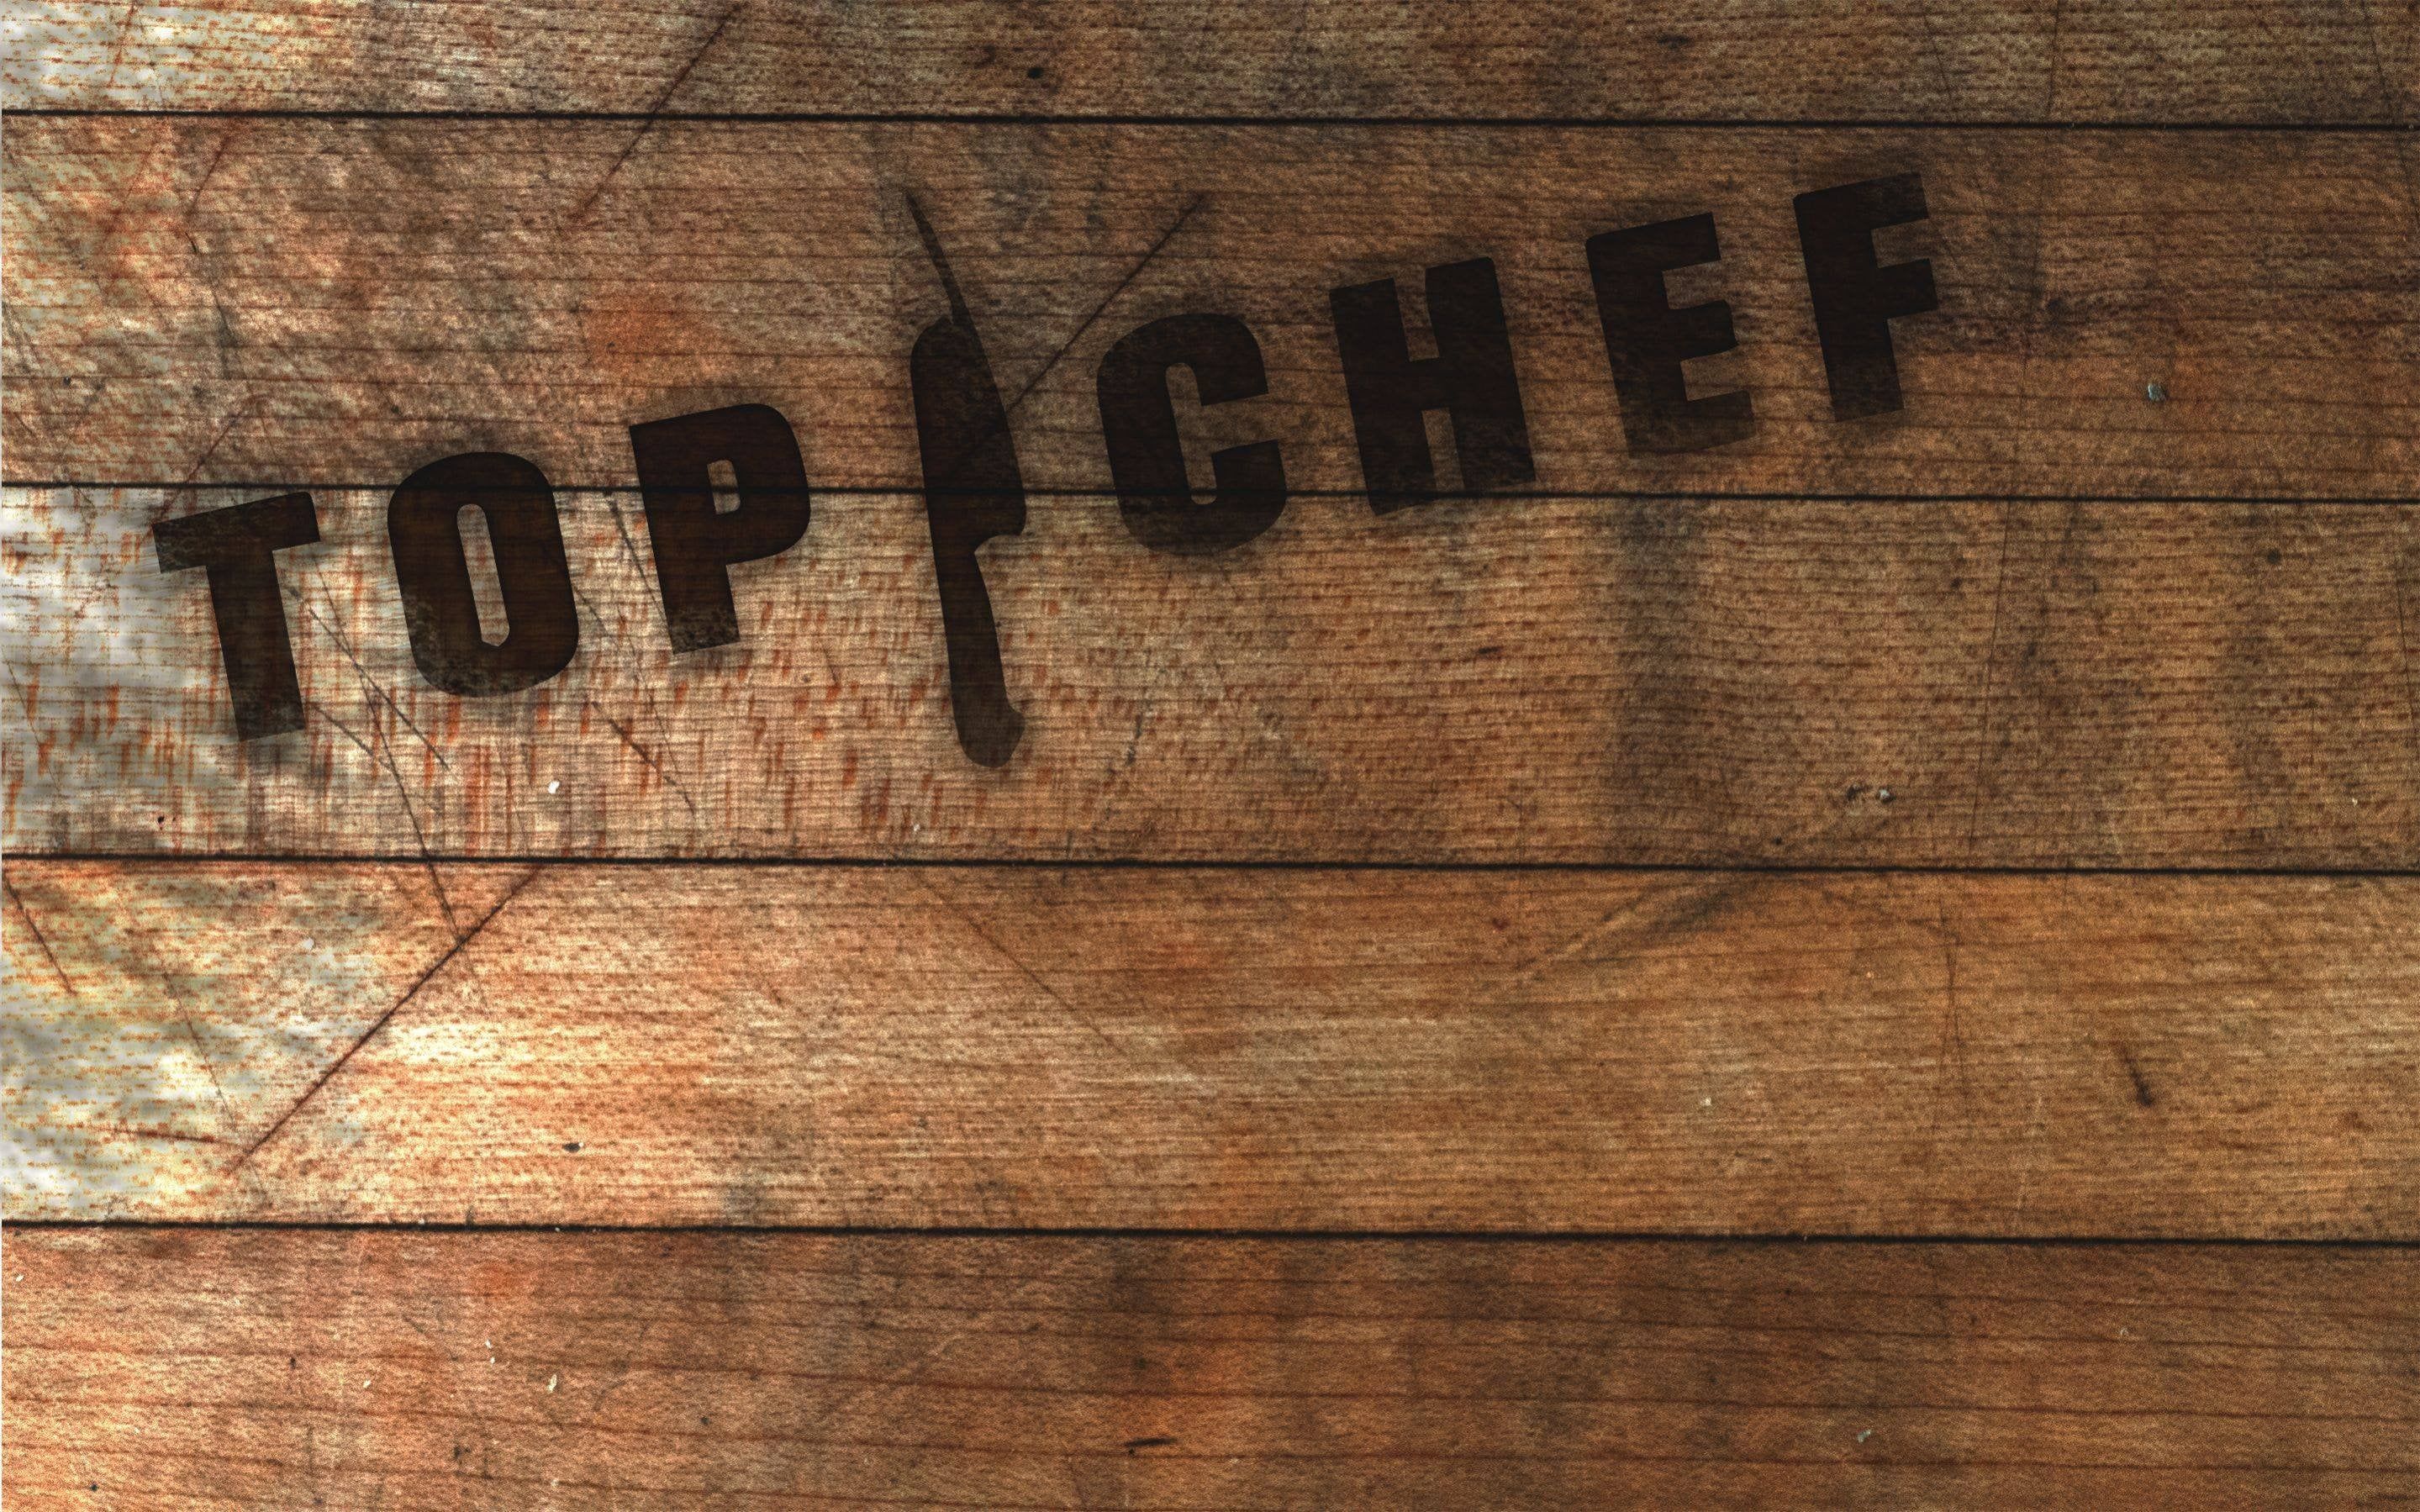 Couldn't find a good top chef wallpaper, so I made one instead